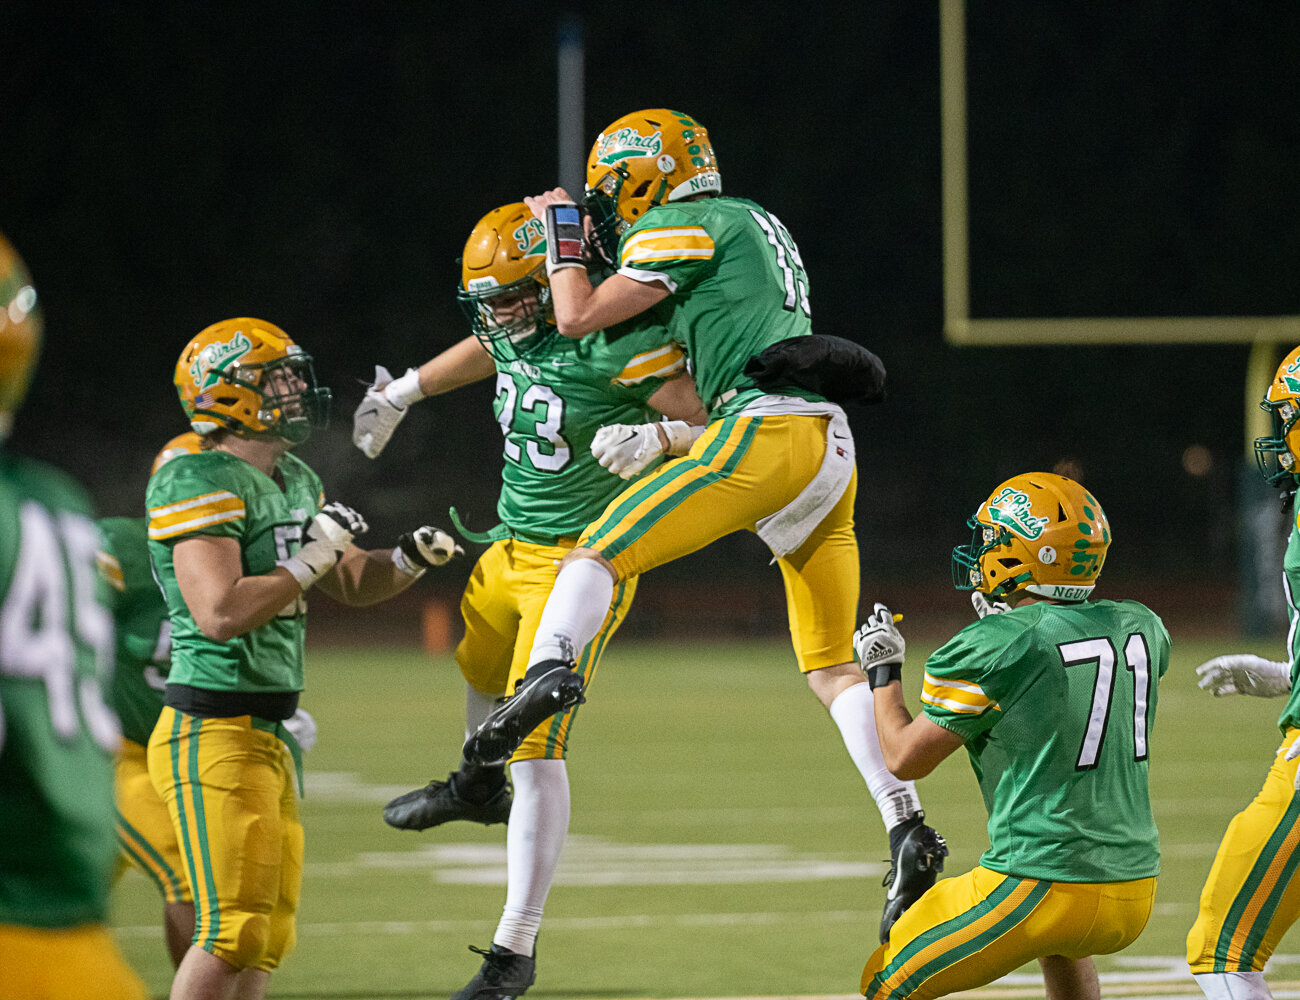 Ethan Kastner (19) and Cash Short (23) celebrate at the end of Tumwater's 19-17 win over North Kitsap in the 2A state semifinals on Nov. 25.